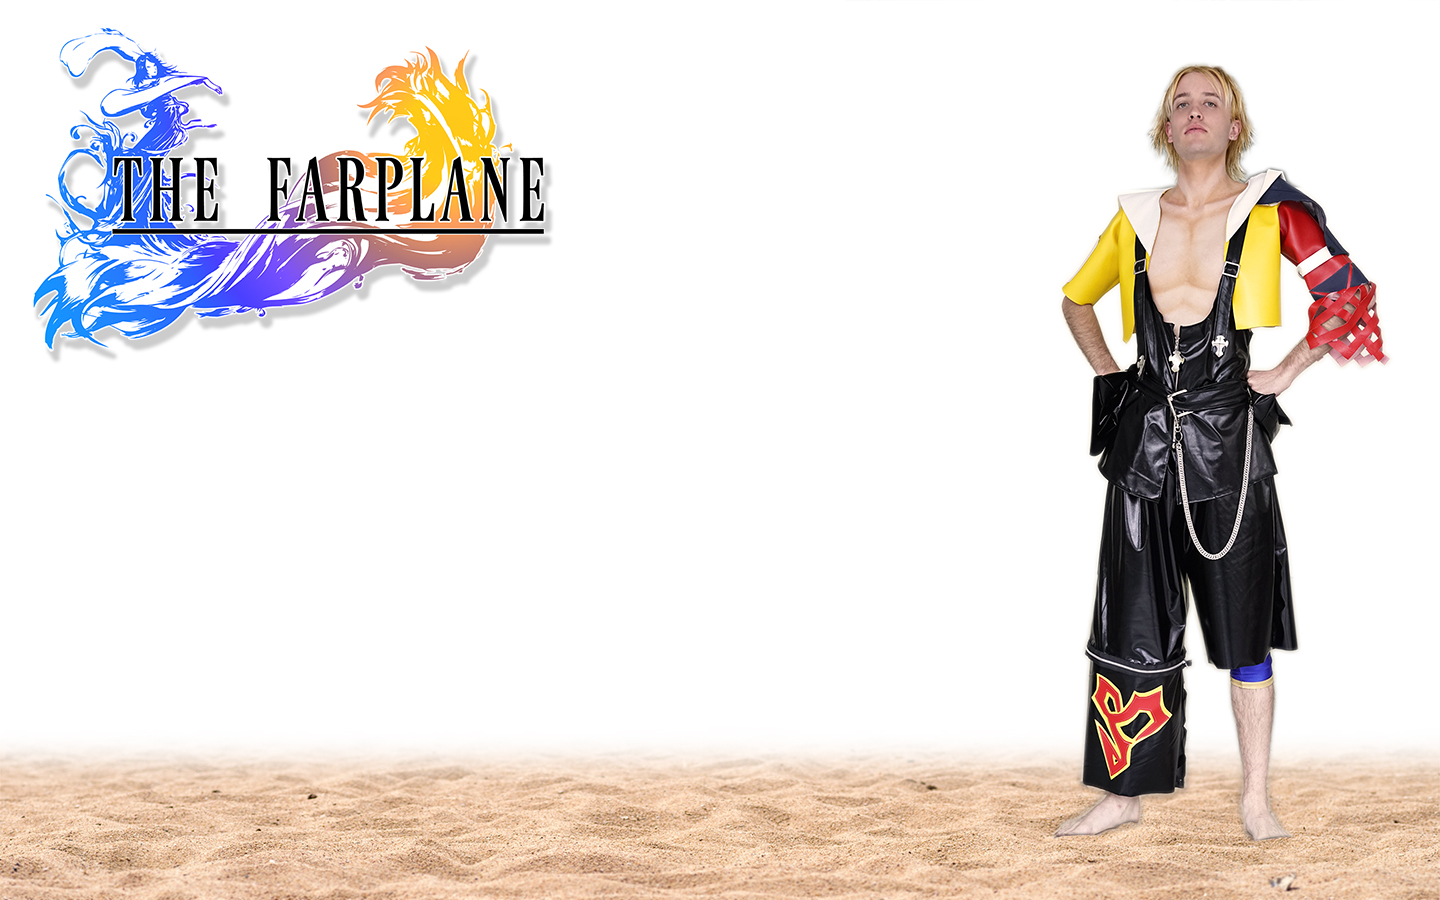 Jesse dressed as Tidus from Final Fantasy 10 in a dominant pose on sand with text that reads 'The Farplane'